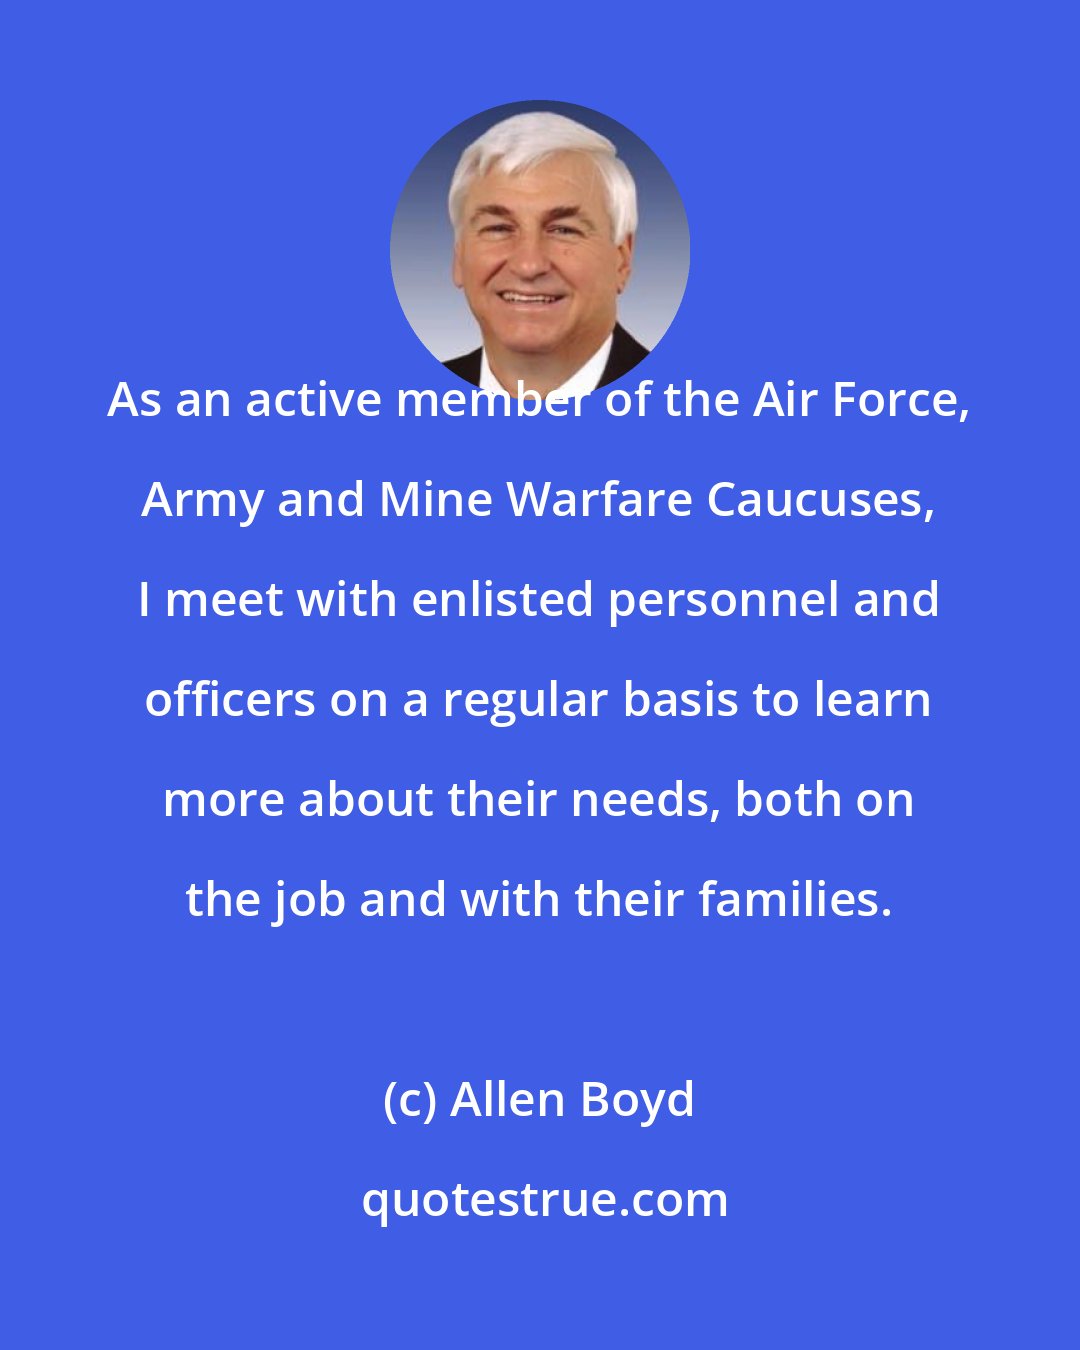 Allen Boyd: As an active member of the Air Force, Army and Mine Warfare Caucuses, I meet with enlisted personnel and officers on a regular basis to learn more about their needs, both on the job and with their families.